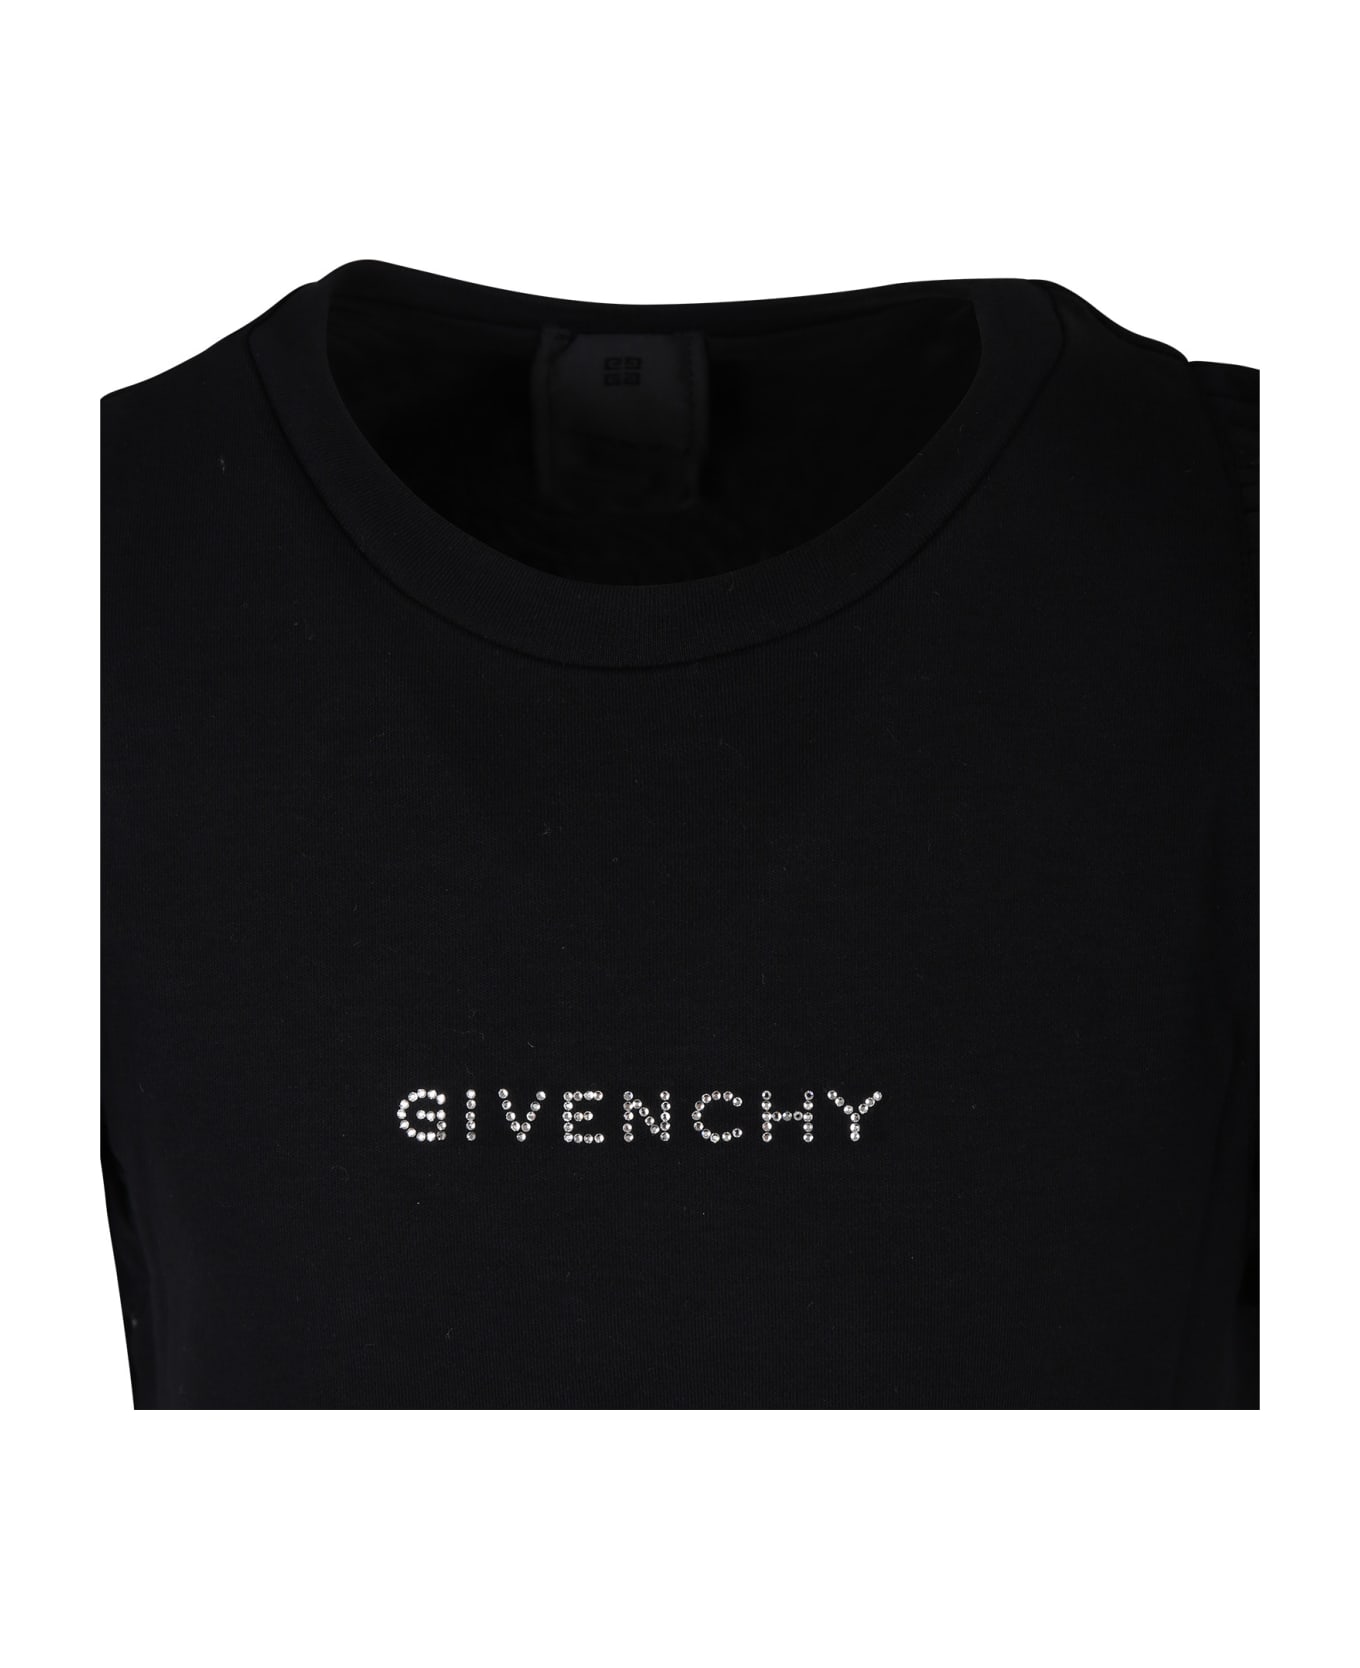 Givenchy Black Dress For Girl With Logo - Black ワンピース＆ドレス